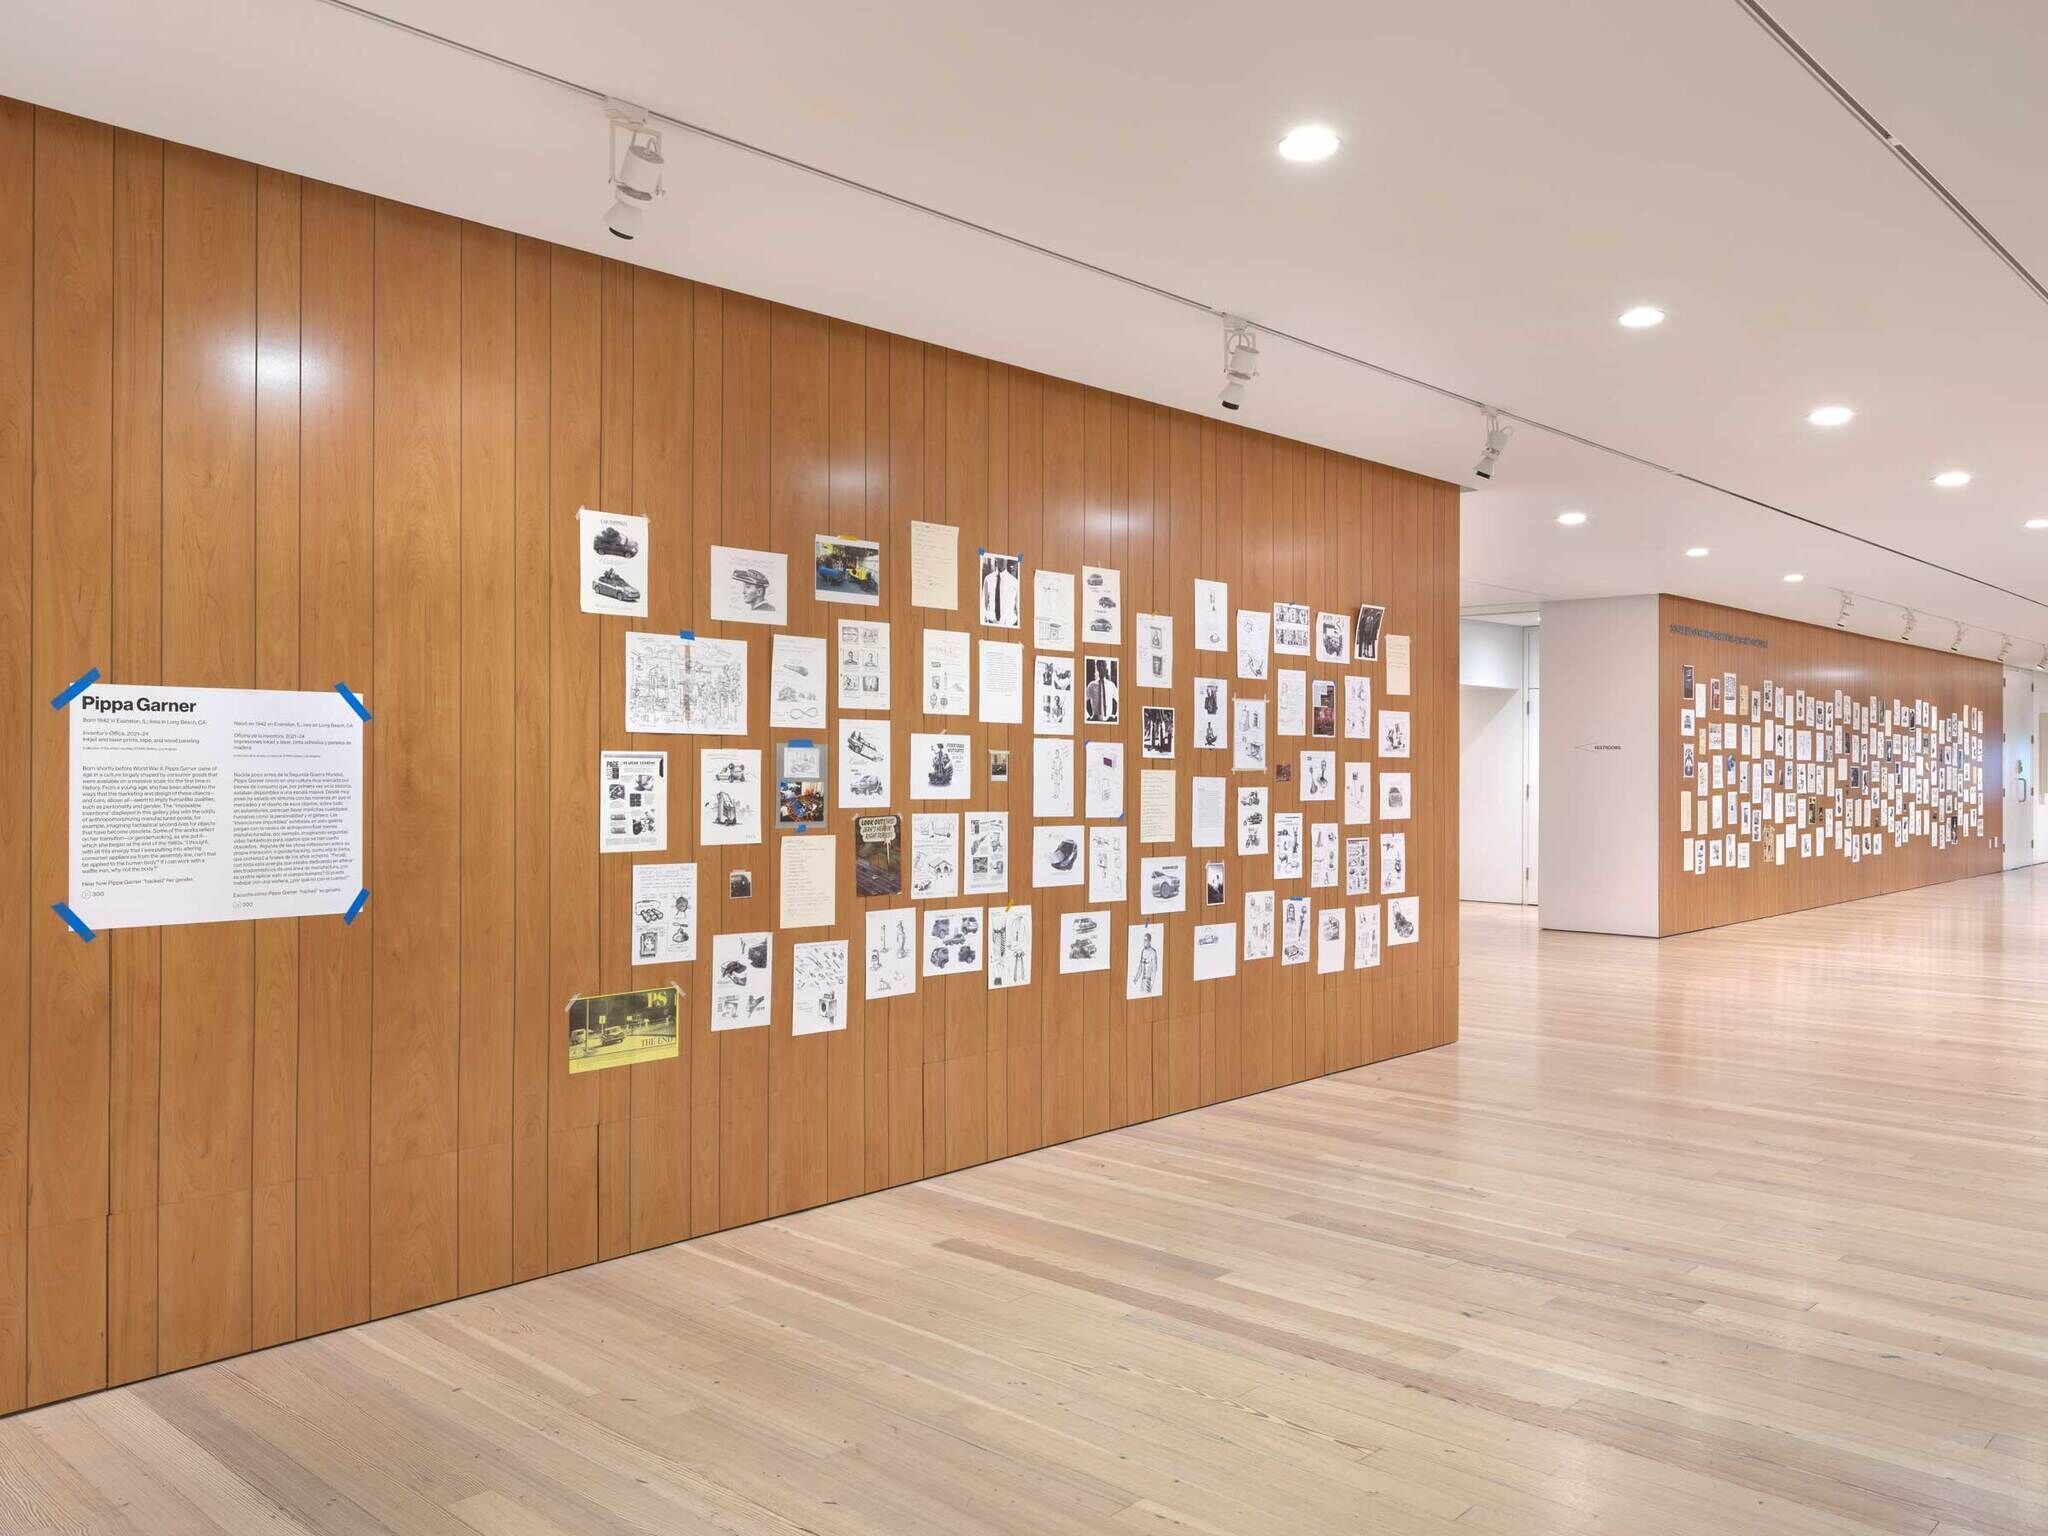 A gallery interior with a wooden wall displaying numerous sketches and images, accompanied by an informational poster on the left.